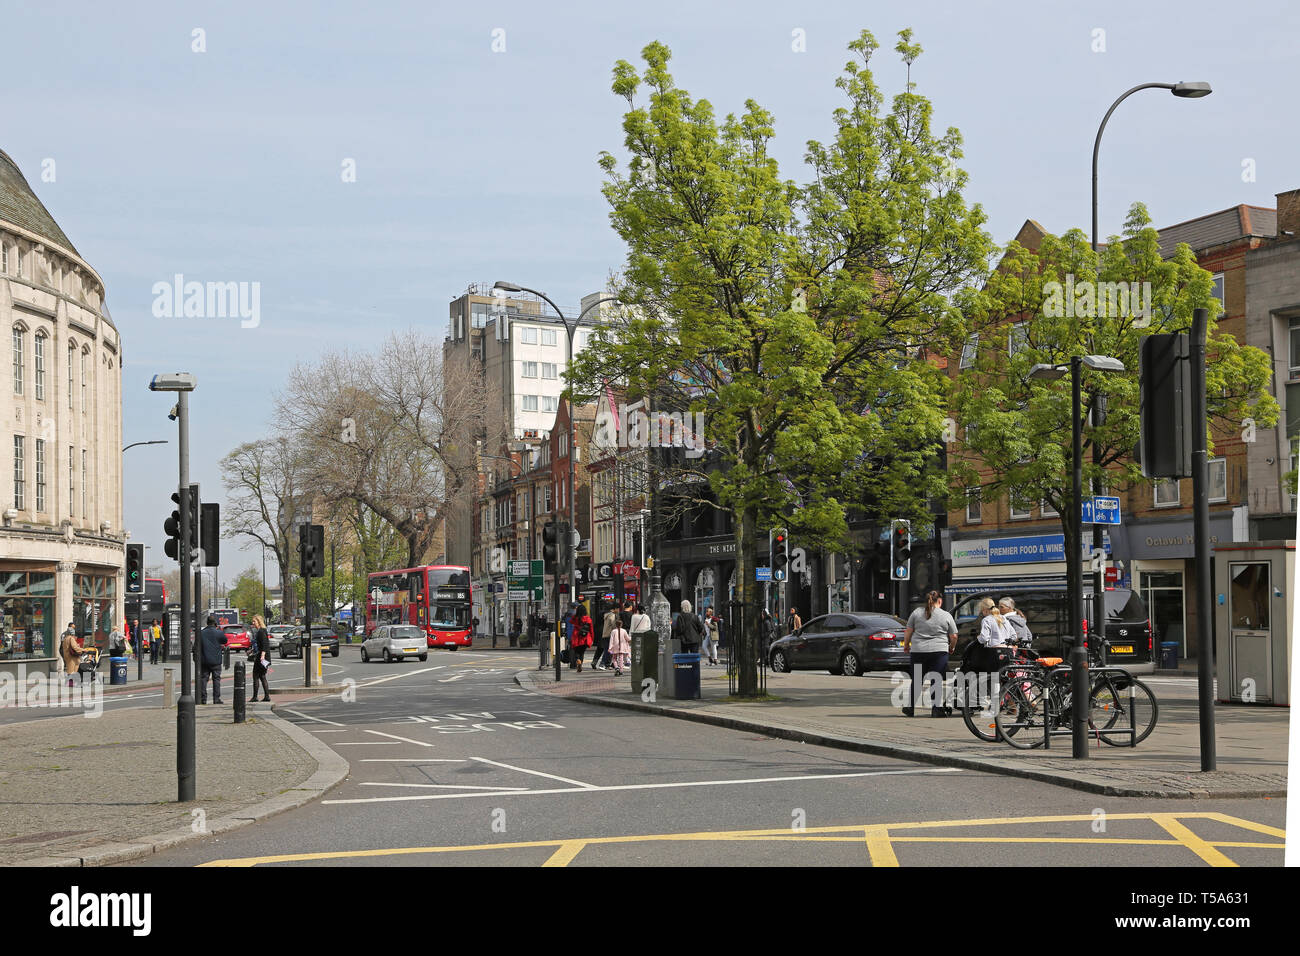 Bus lane in the centre of Catford,South London, UK. Shows shops, traffic lights and pedestrians. Stock Photo